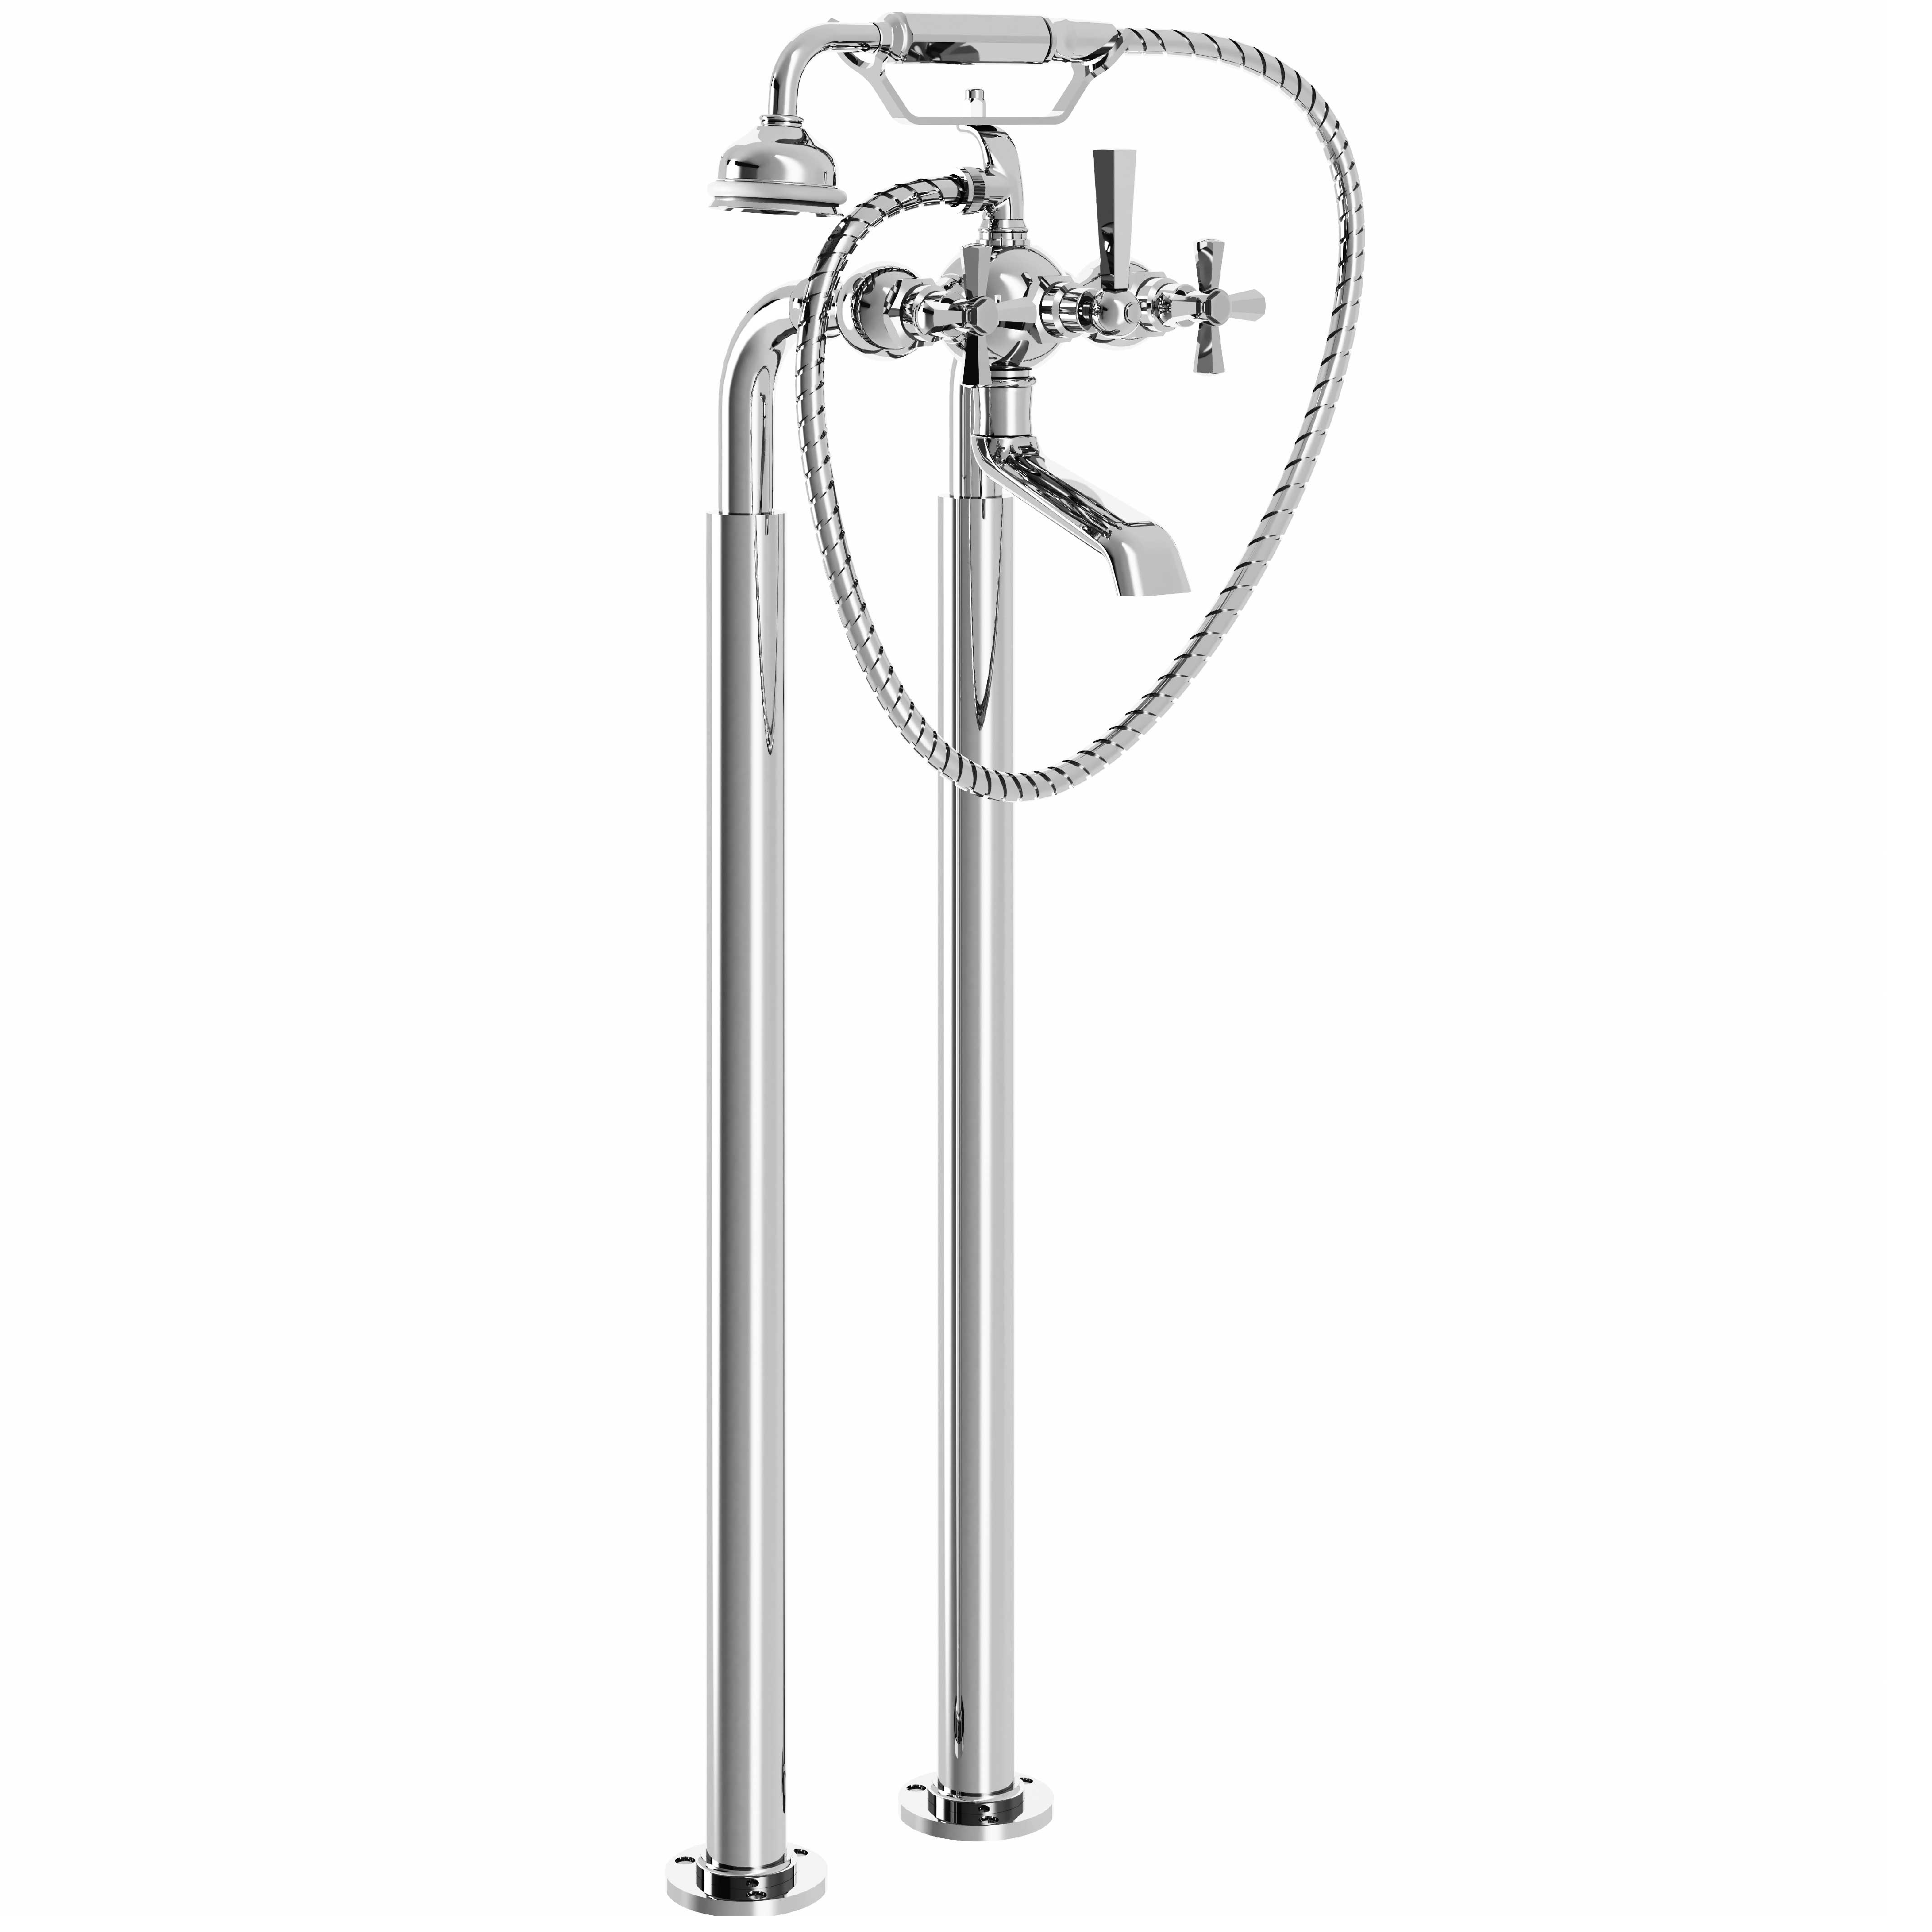 M38-3309 Floor mounted bath and shower mixer